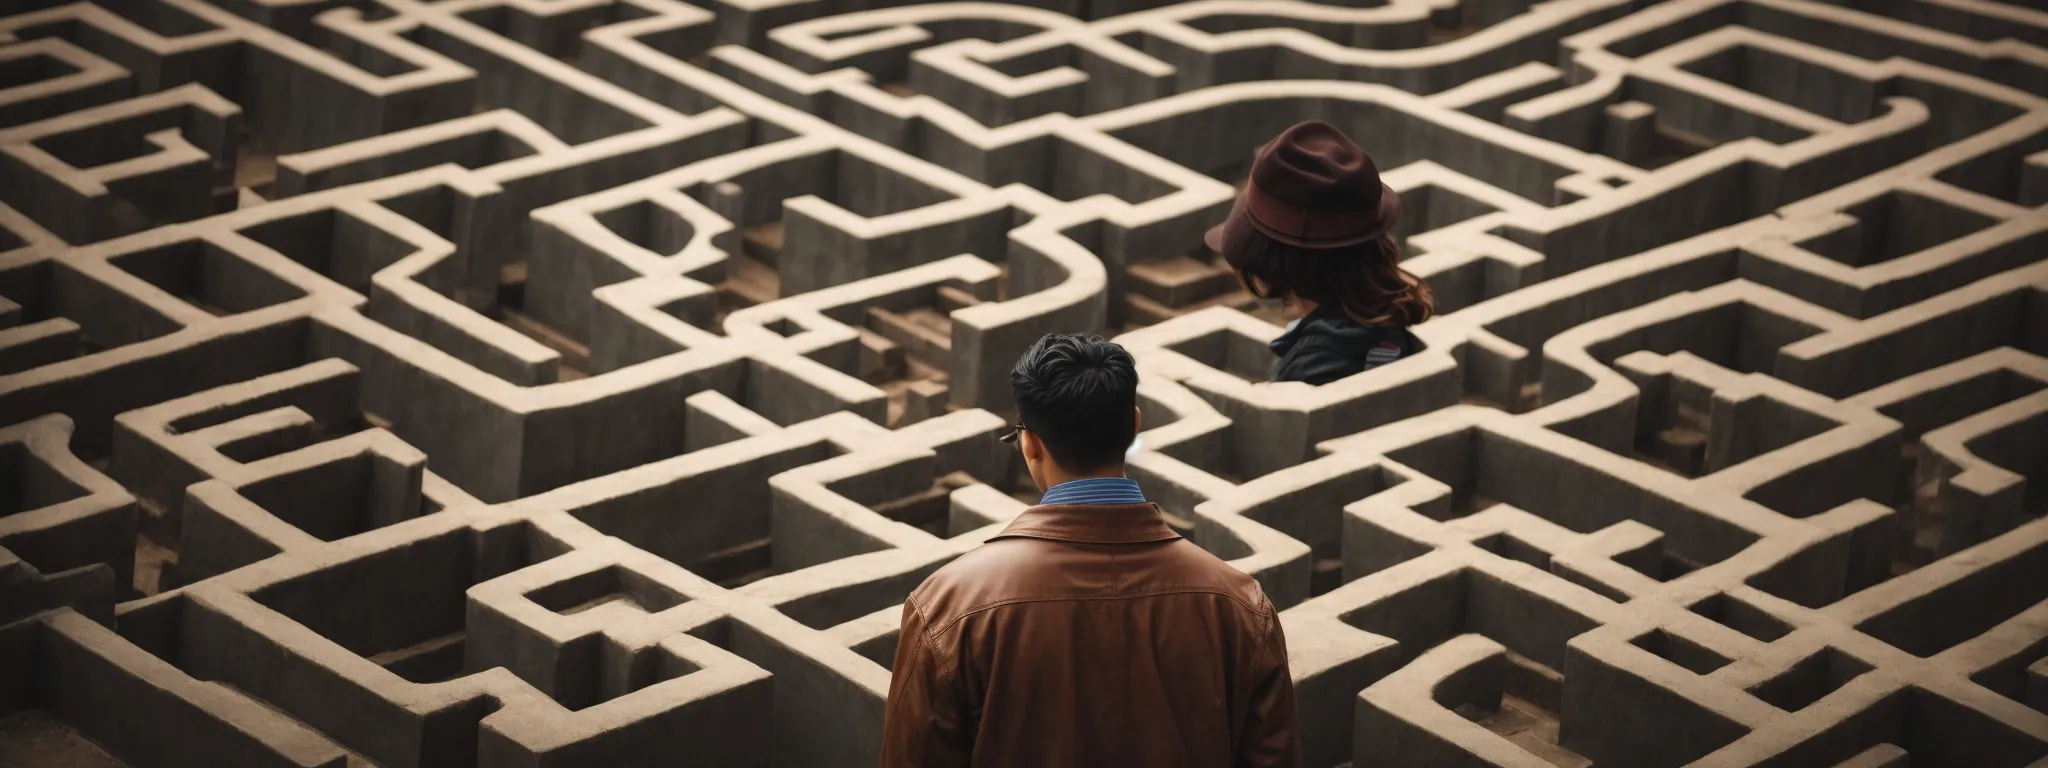 a person pondering over a maze designed with seo-related icons, highlighting the strategic pathway through it.